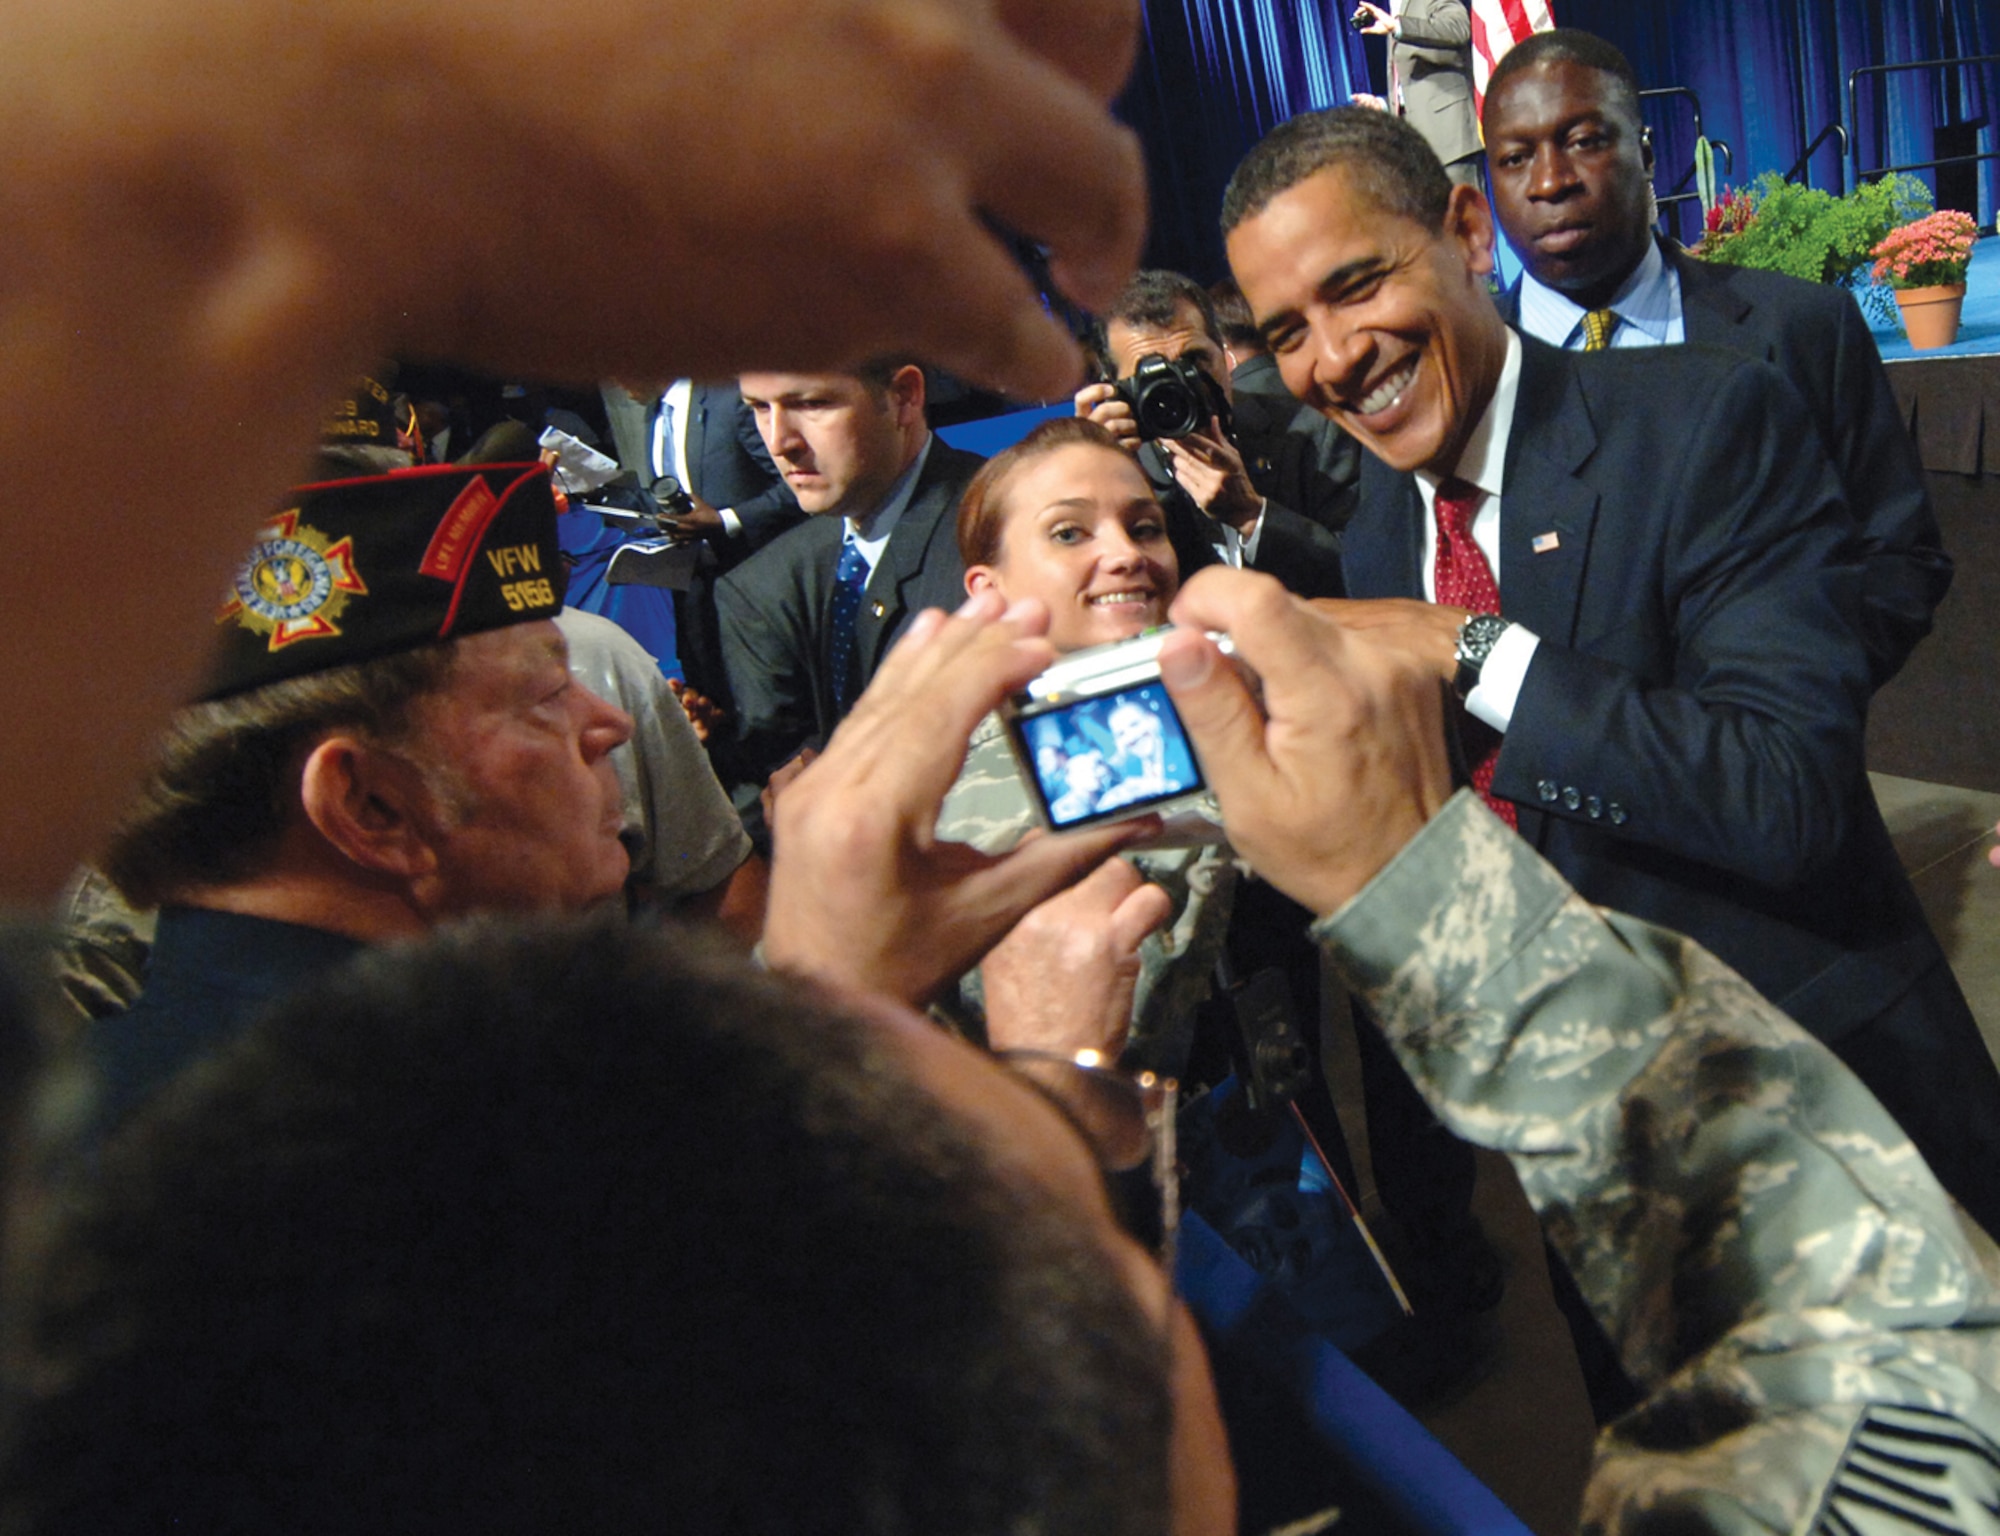 Capt. Kristen Gibson, 56th Operations Group Executive Officer, has her photo taken while giving President Barack Obama a "fist-bump" at the Veterans of Foreign Wars national convention held in downtown Phoenix, Aug. 17.  (U.S. Air Force photo by Tech. Sgt. Jeffrey A. Wolfe)